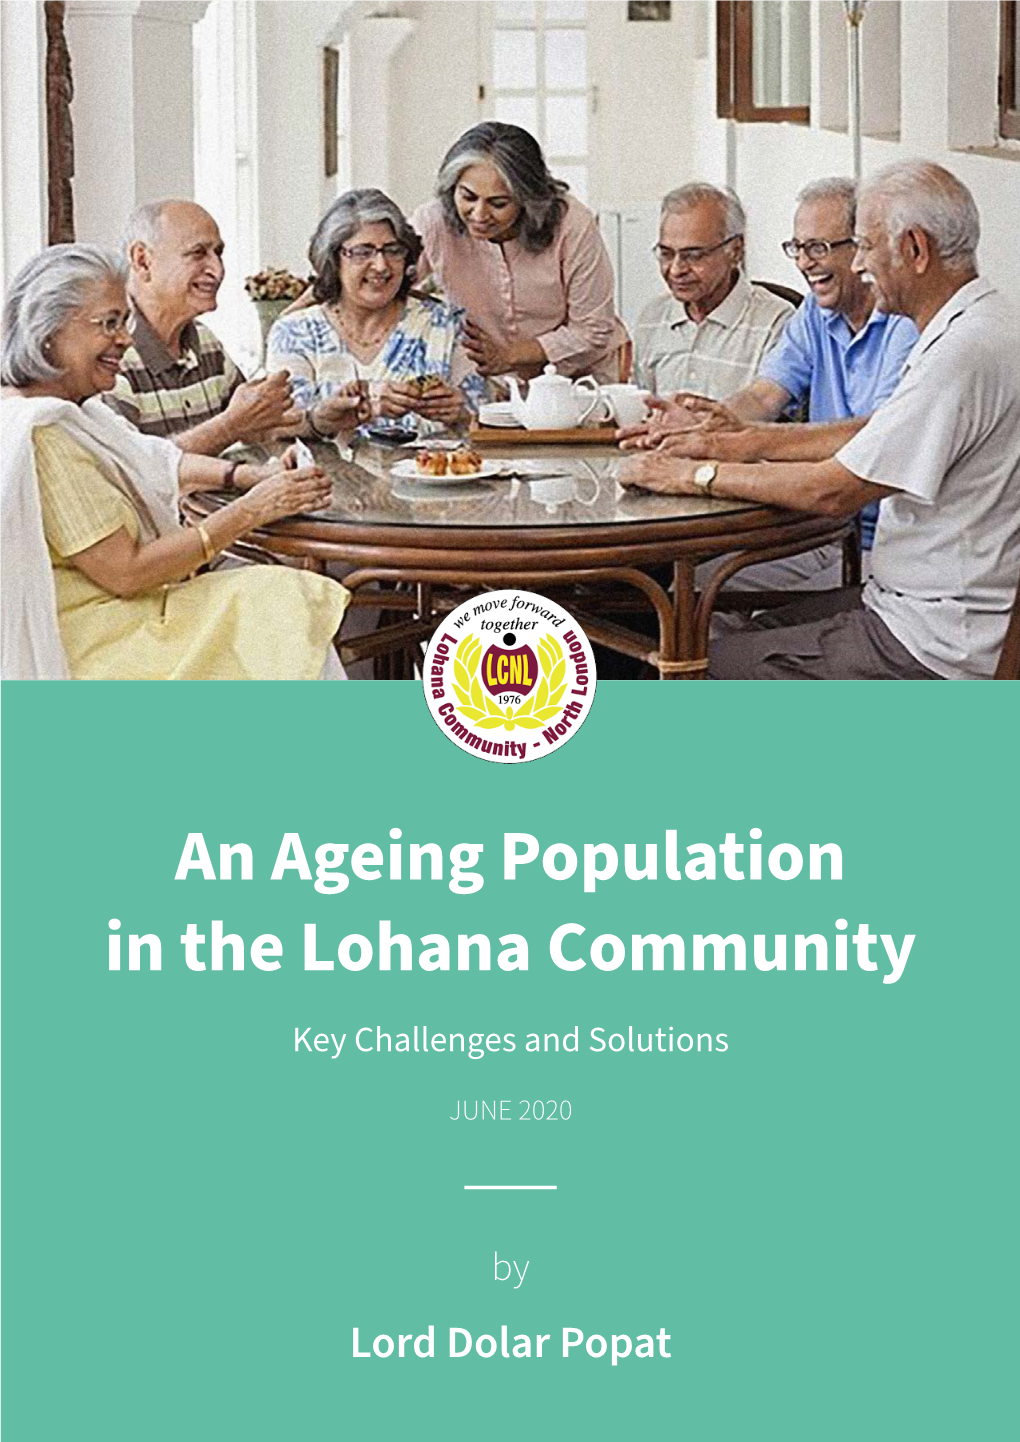 An Ageing Population in the Lohana Community Key Challenges and Solutions